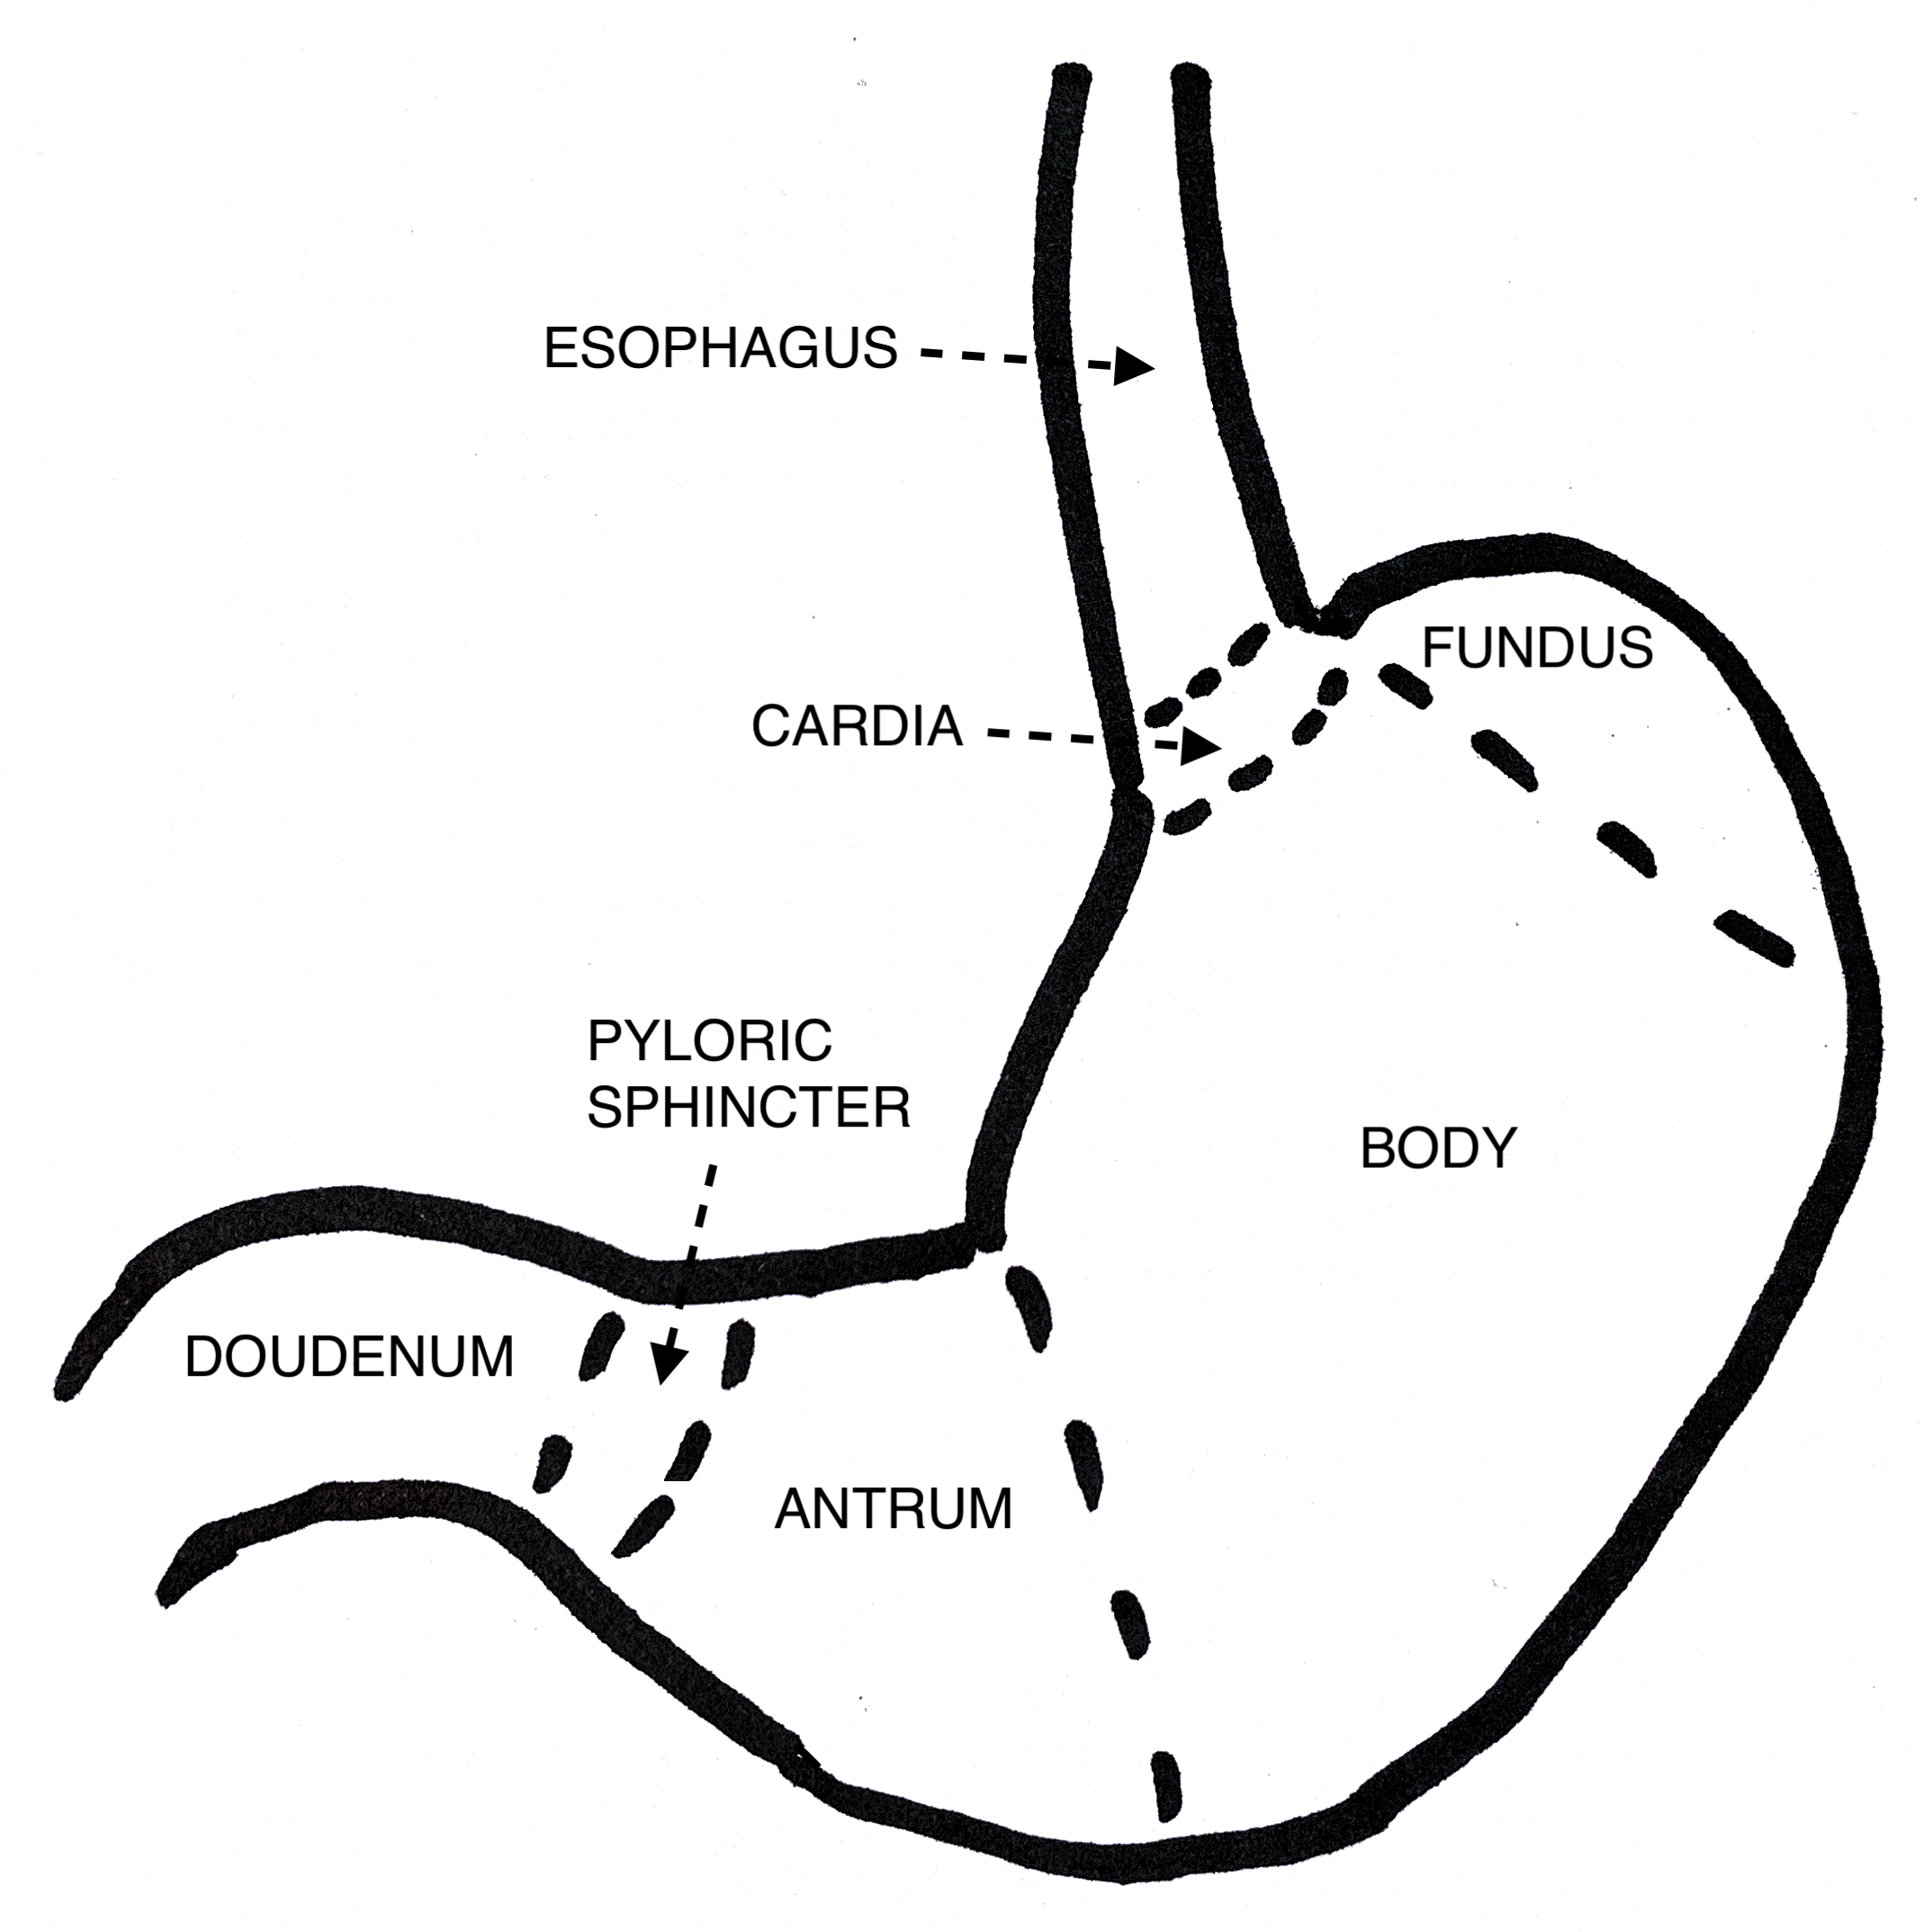 Diagram of the stomach, illustrating cardia, fundus, body, antrum, and pyloric sphincter. 